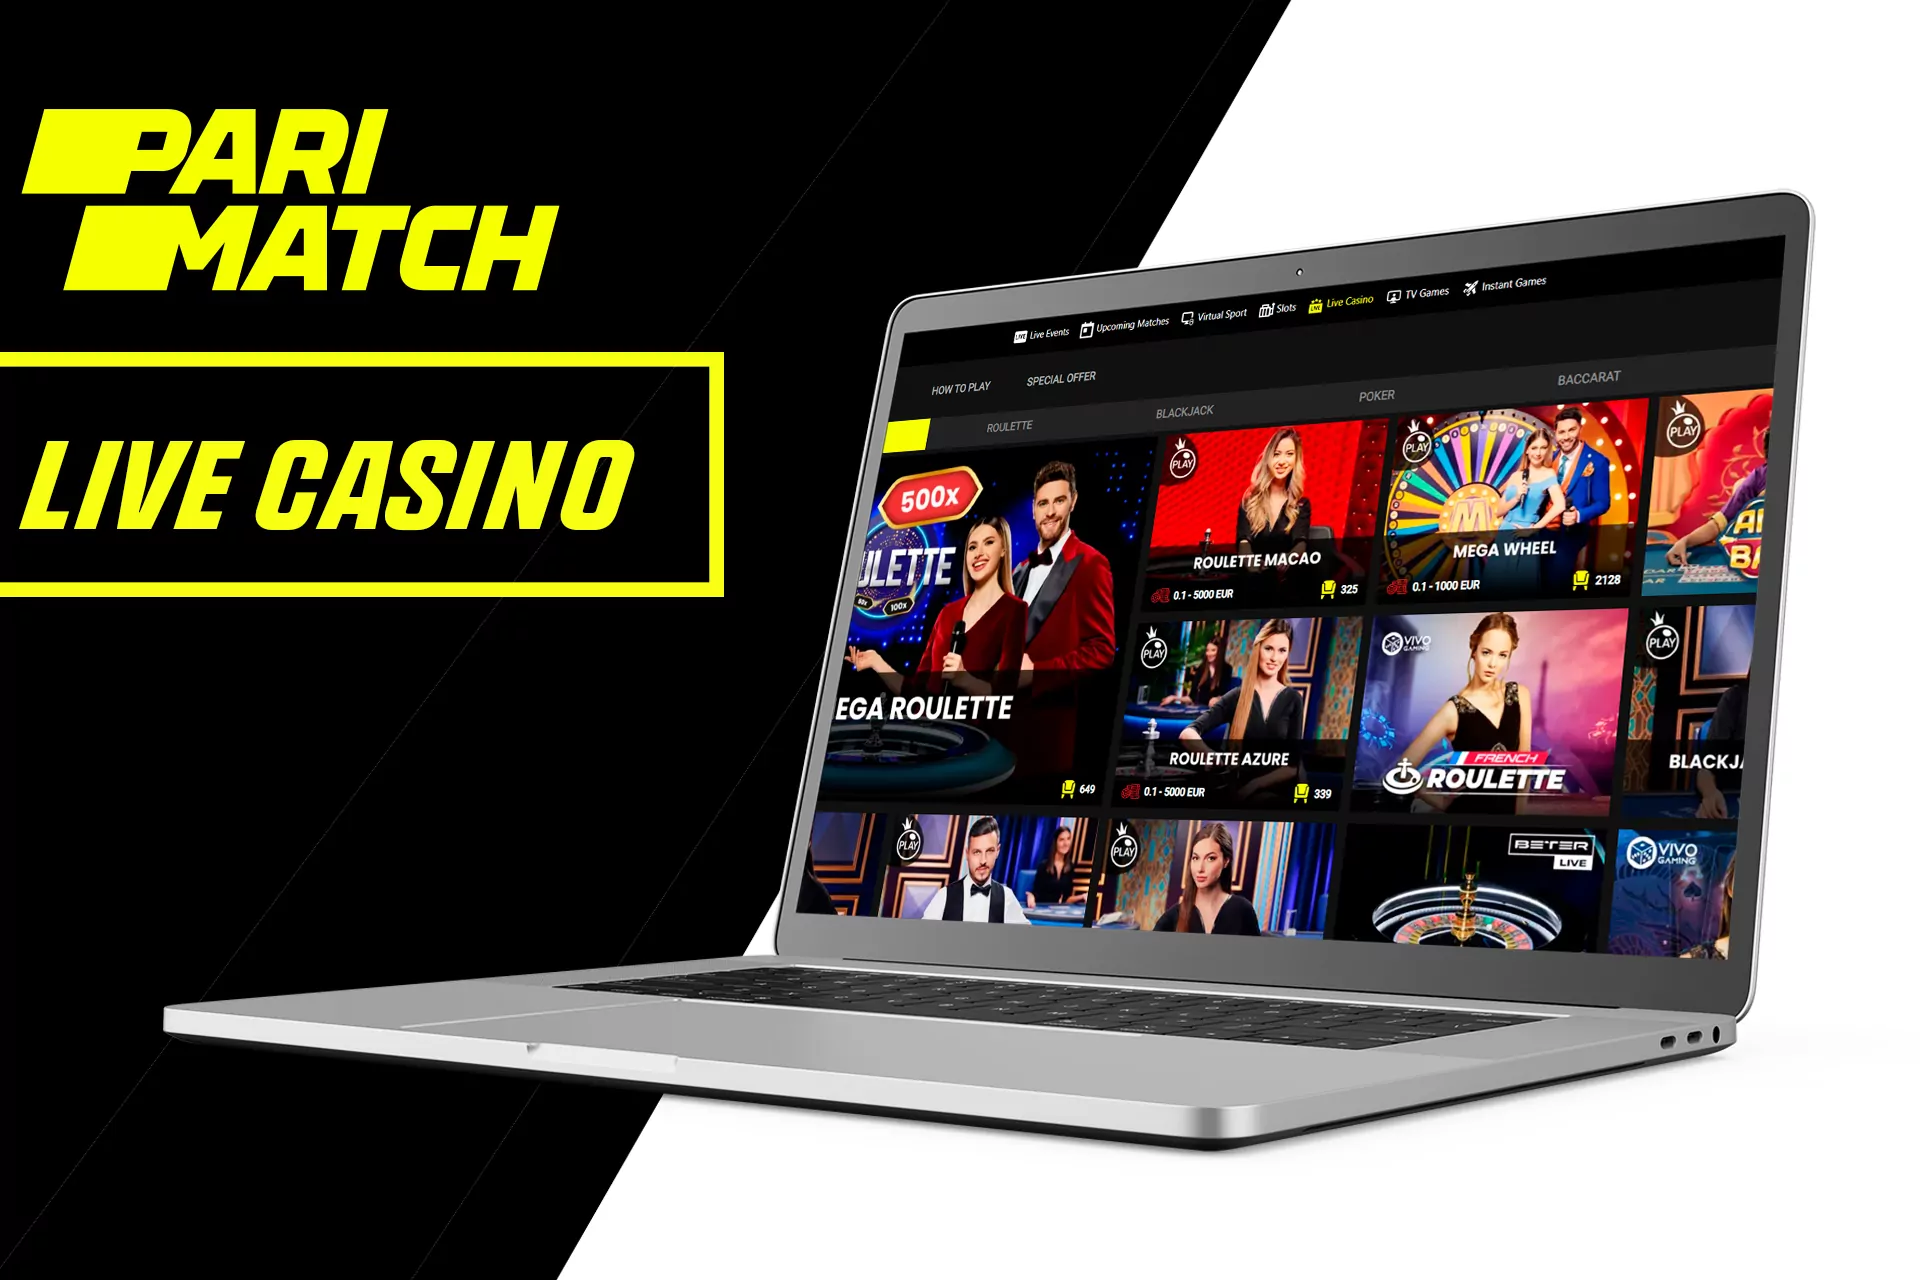 Play casino games against the real Parimatch dealers.